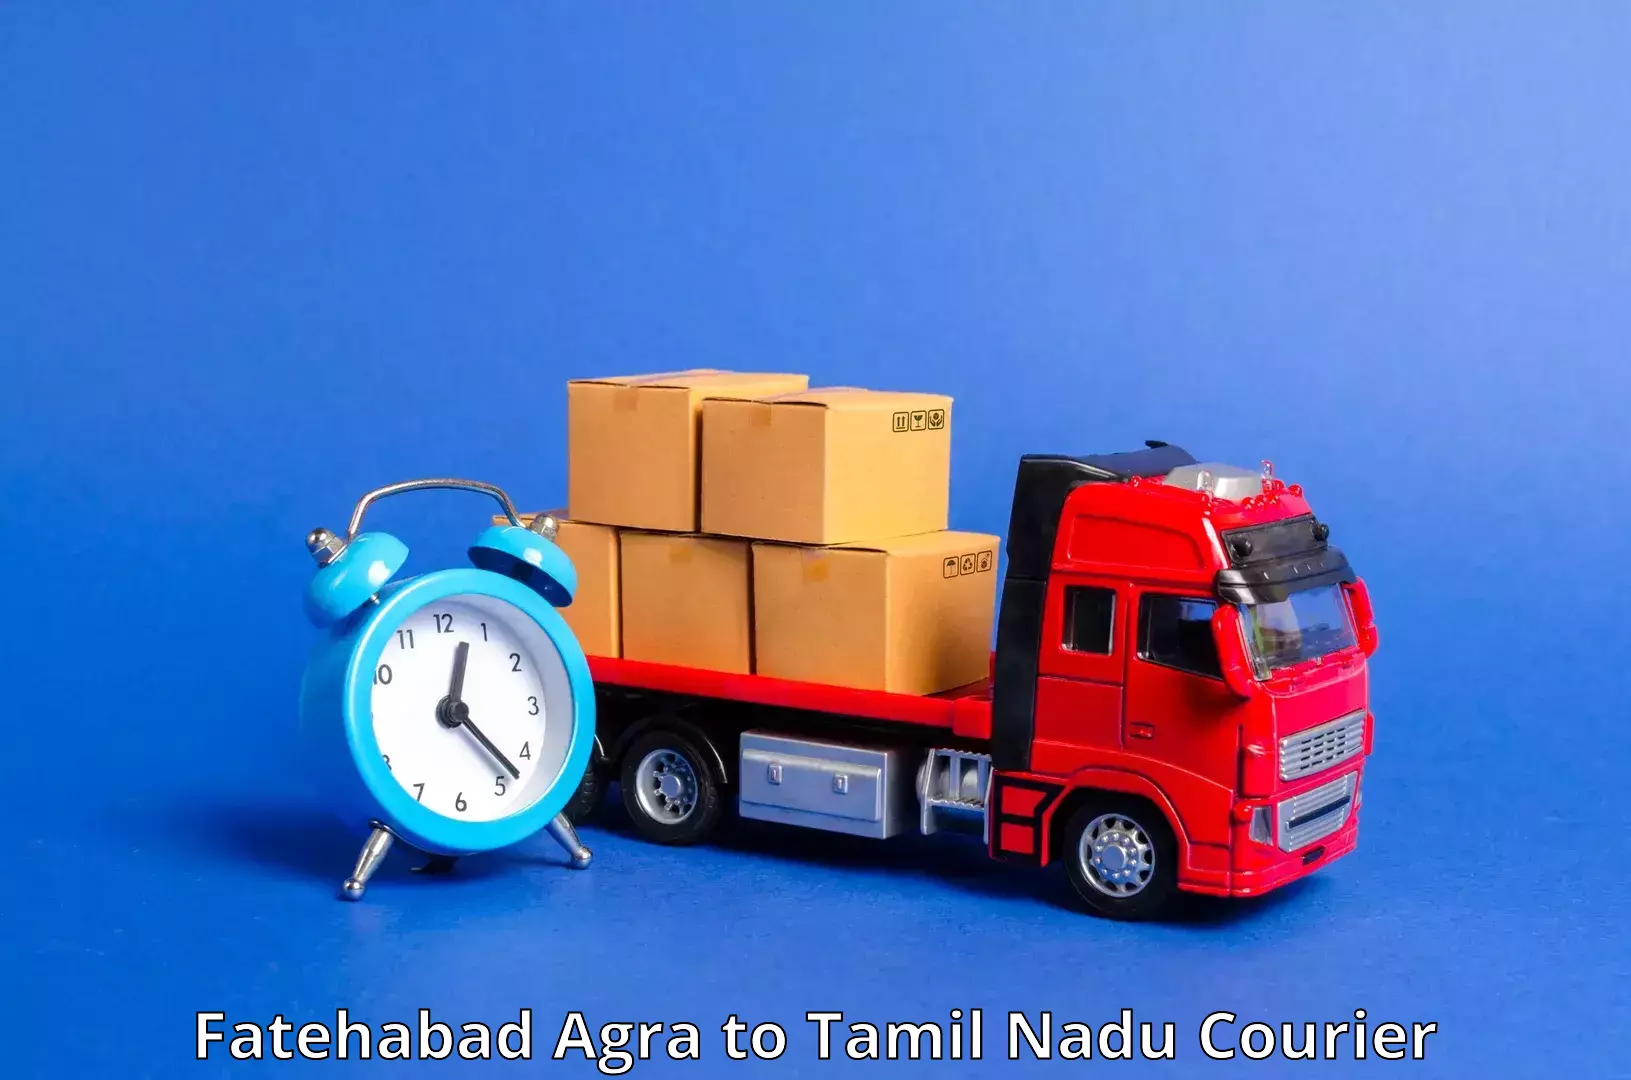 International courier networks Fatehabad Agra to Sattur